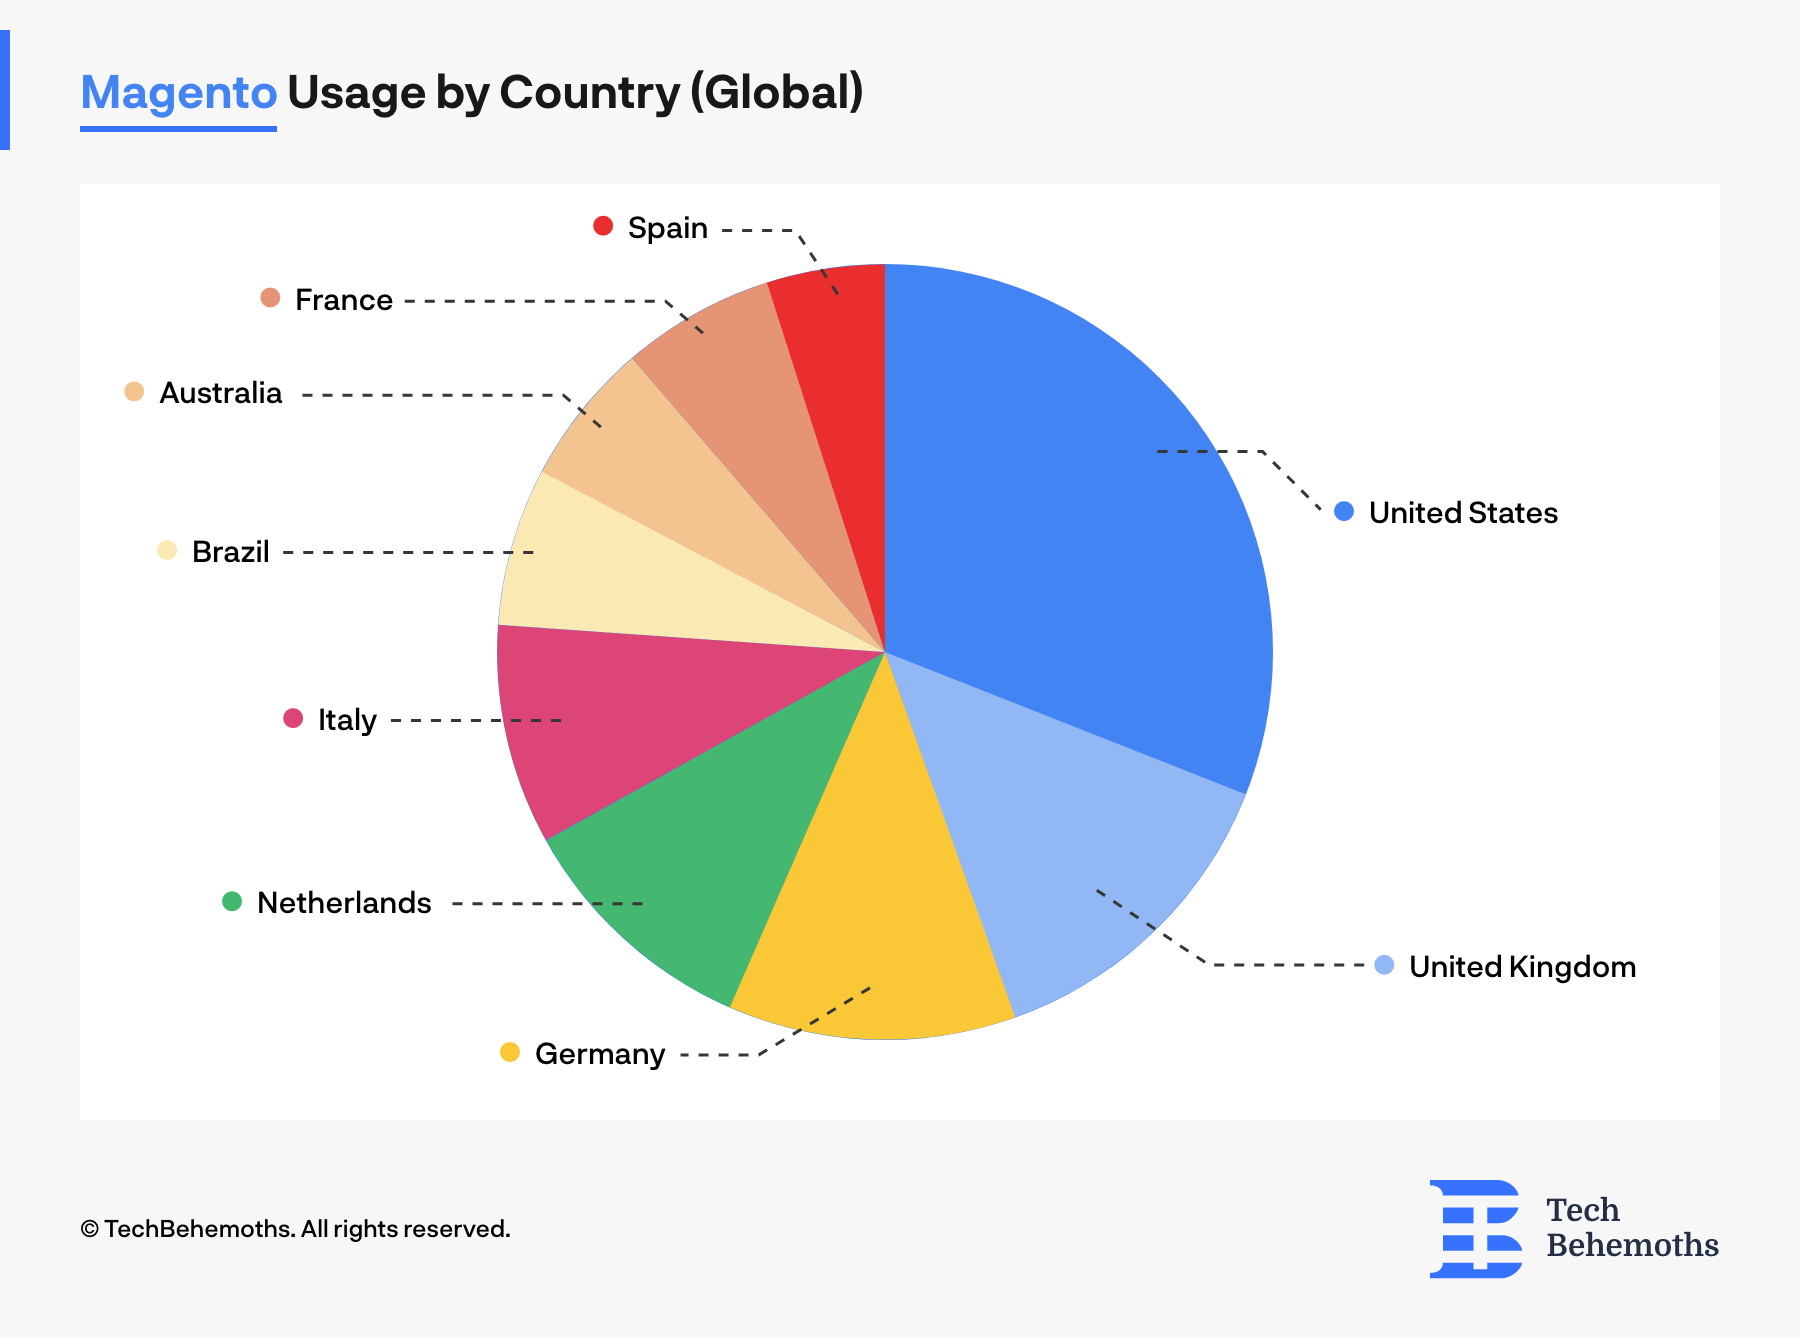 Magento usage by country